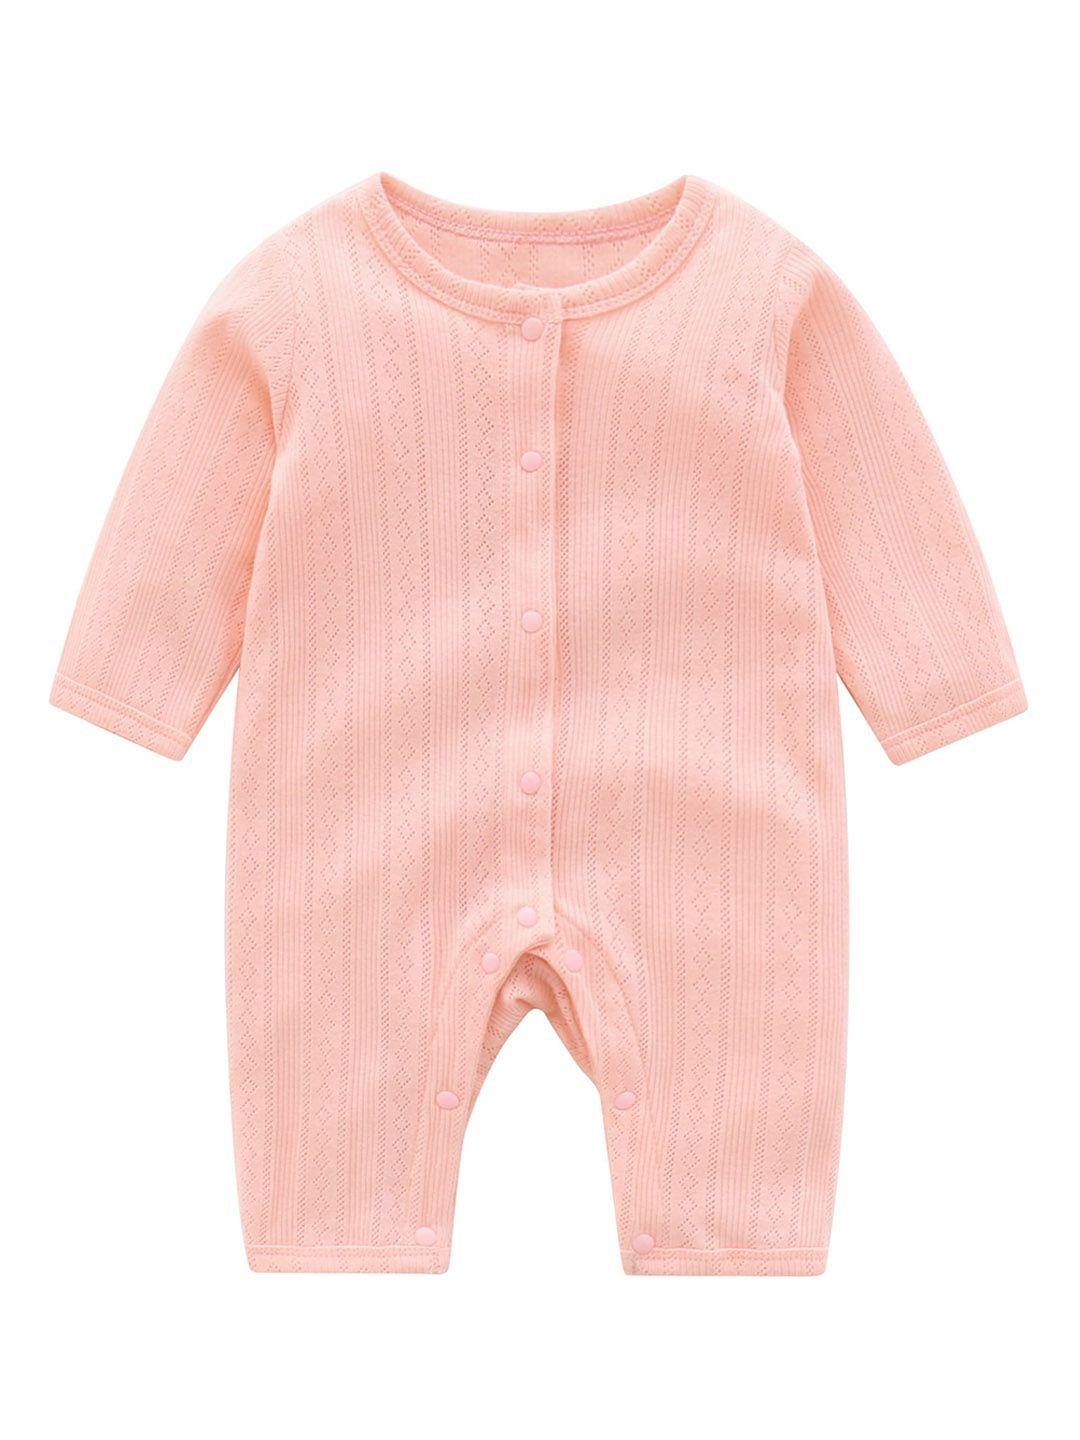 stylecast-infant-girls-pink-self-design-cotton-rompers